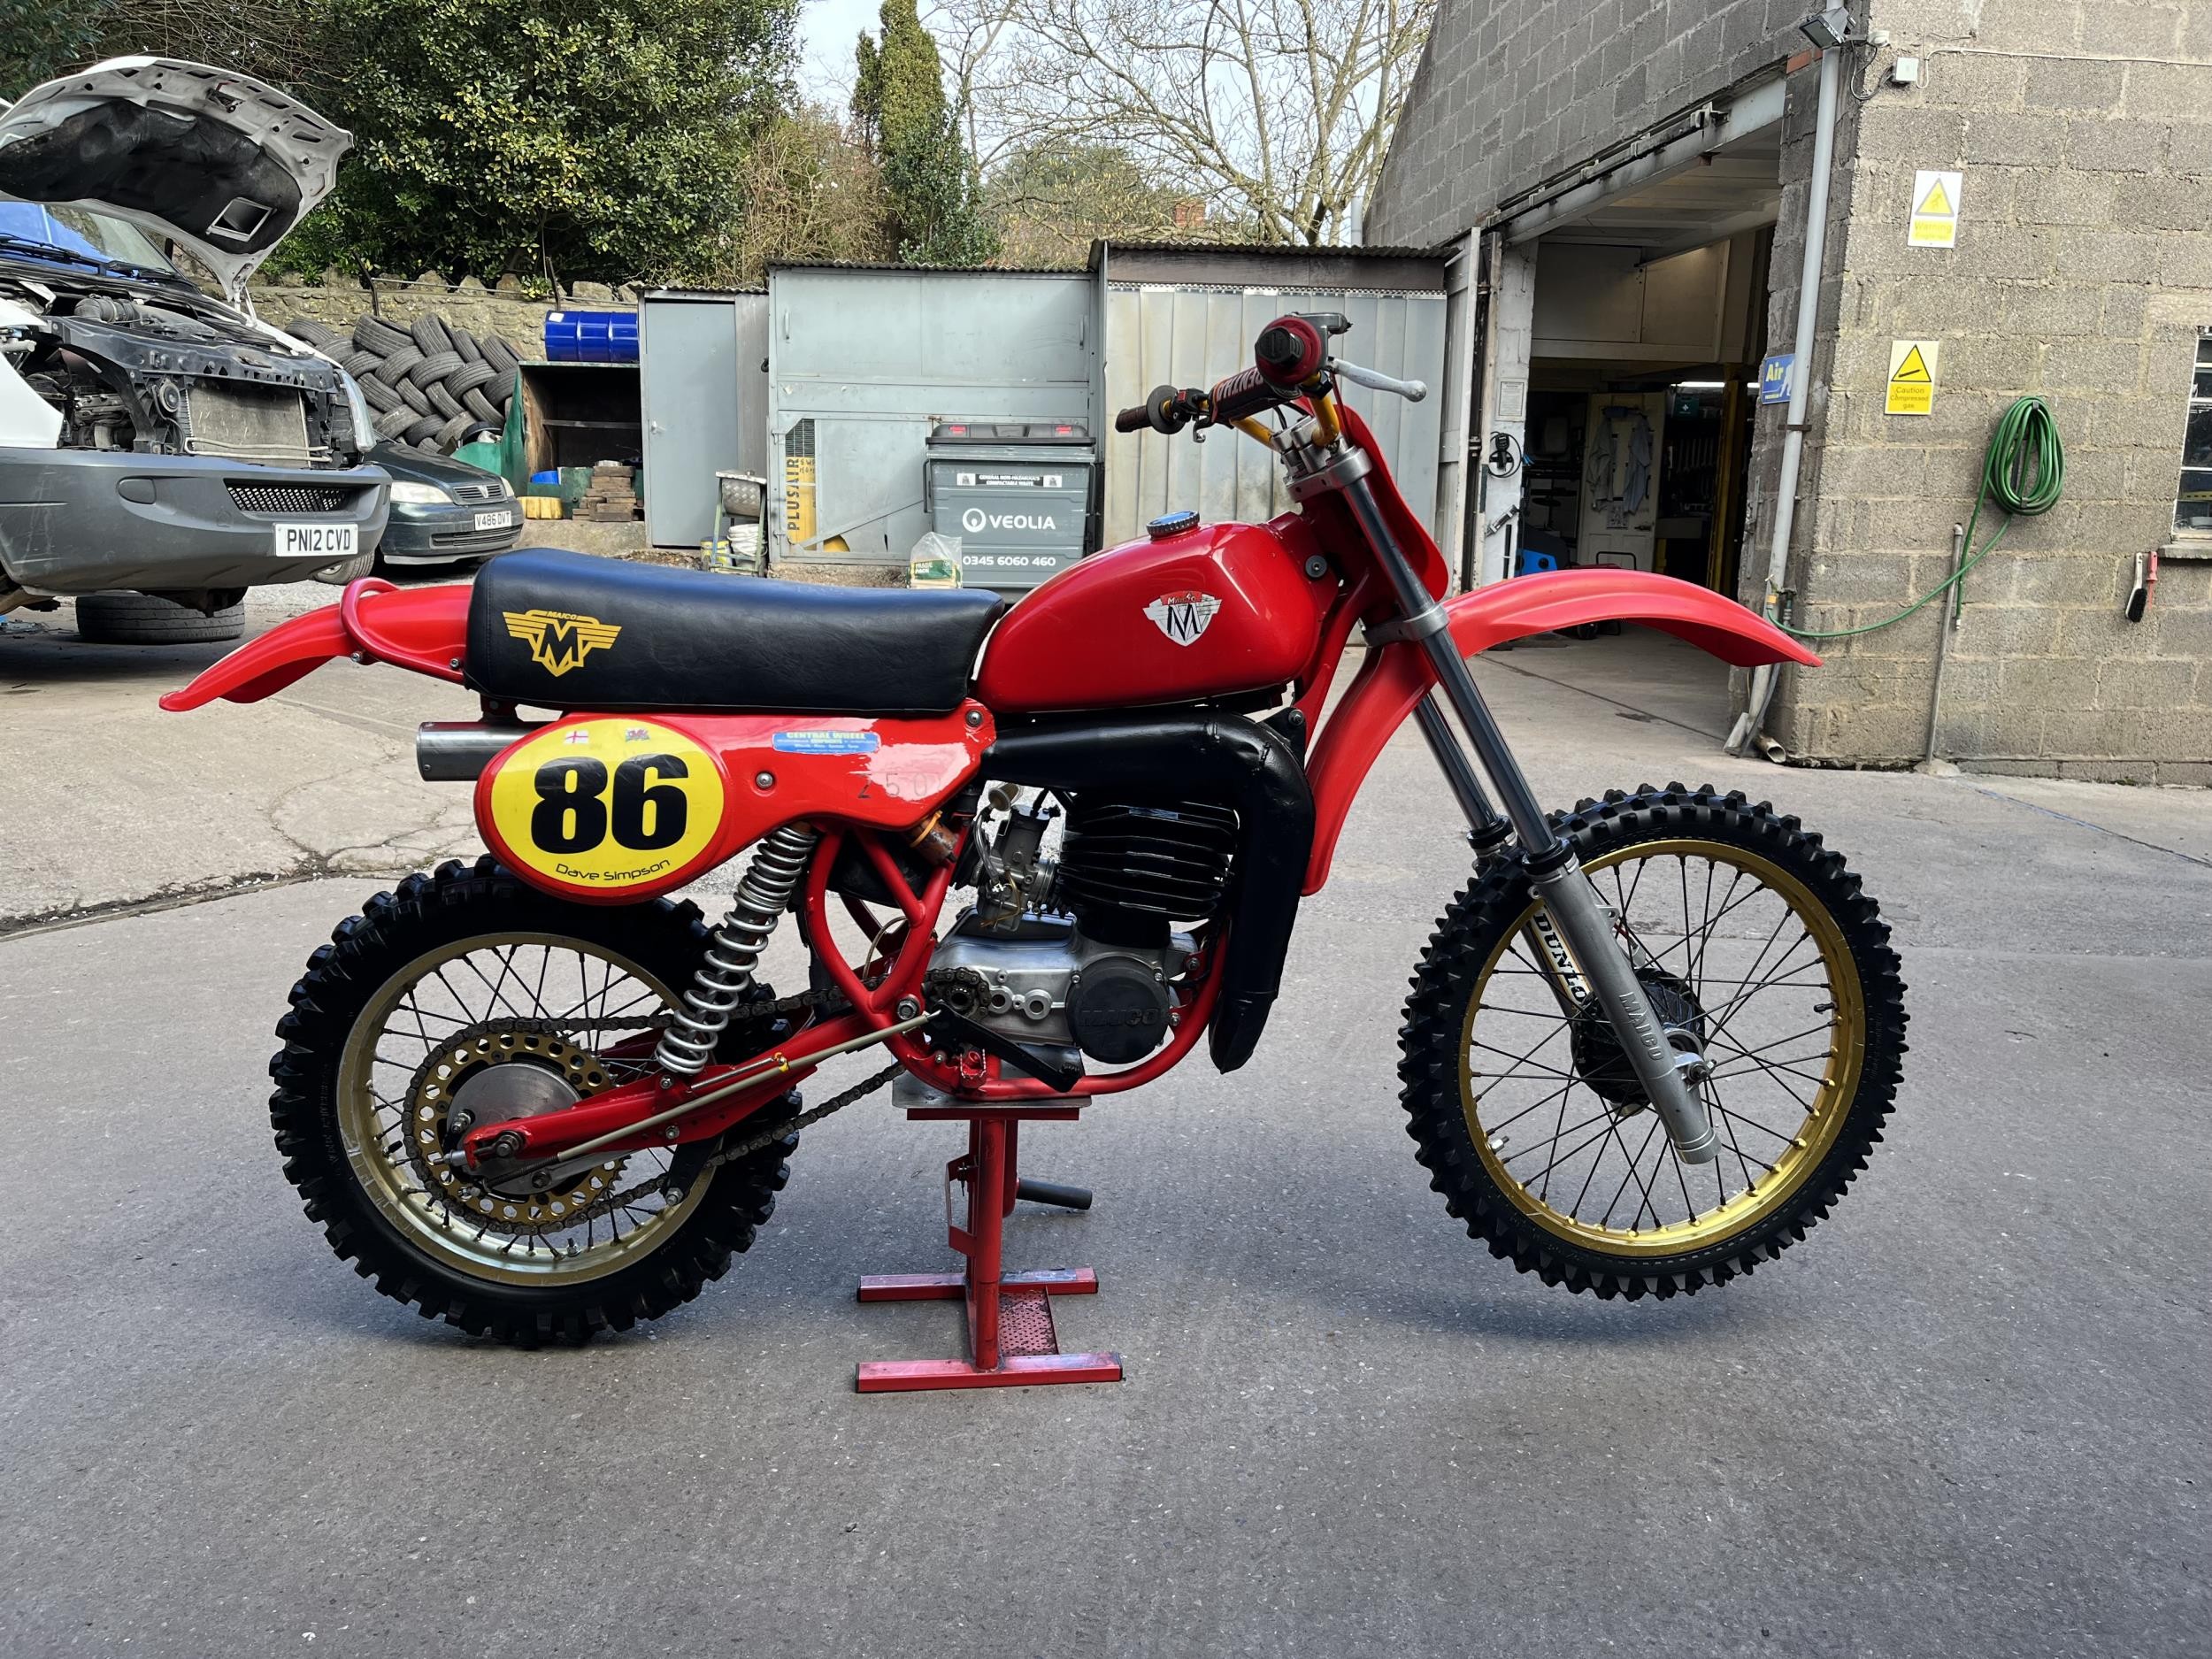 1979 Maico 250 Twin shock Frame number TBA Engine number MT 3362783 Restored by the present owner